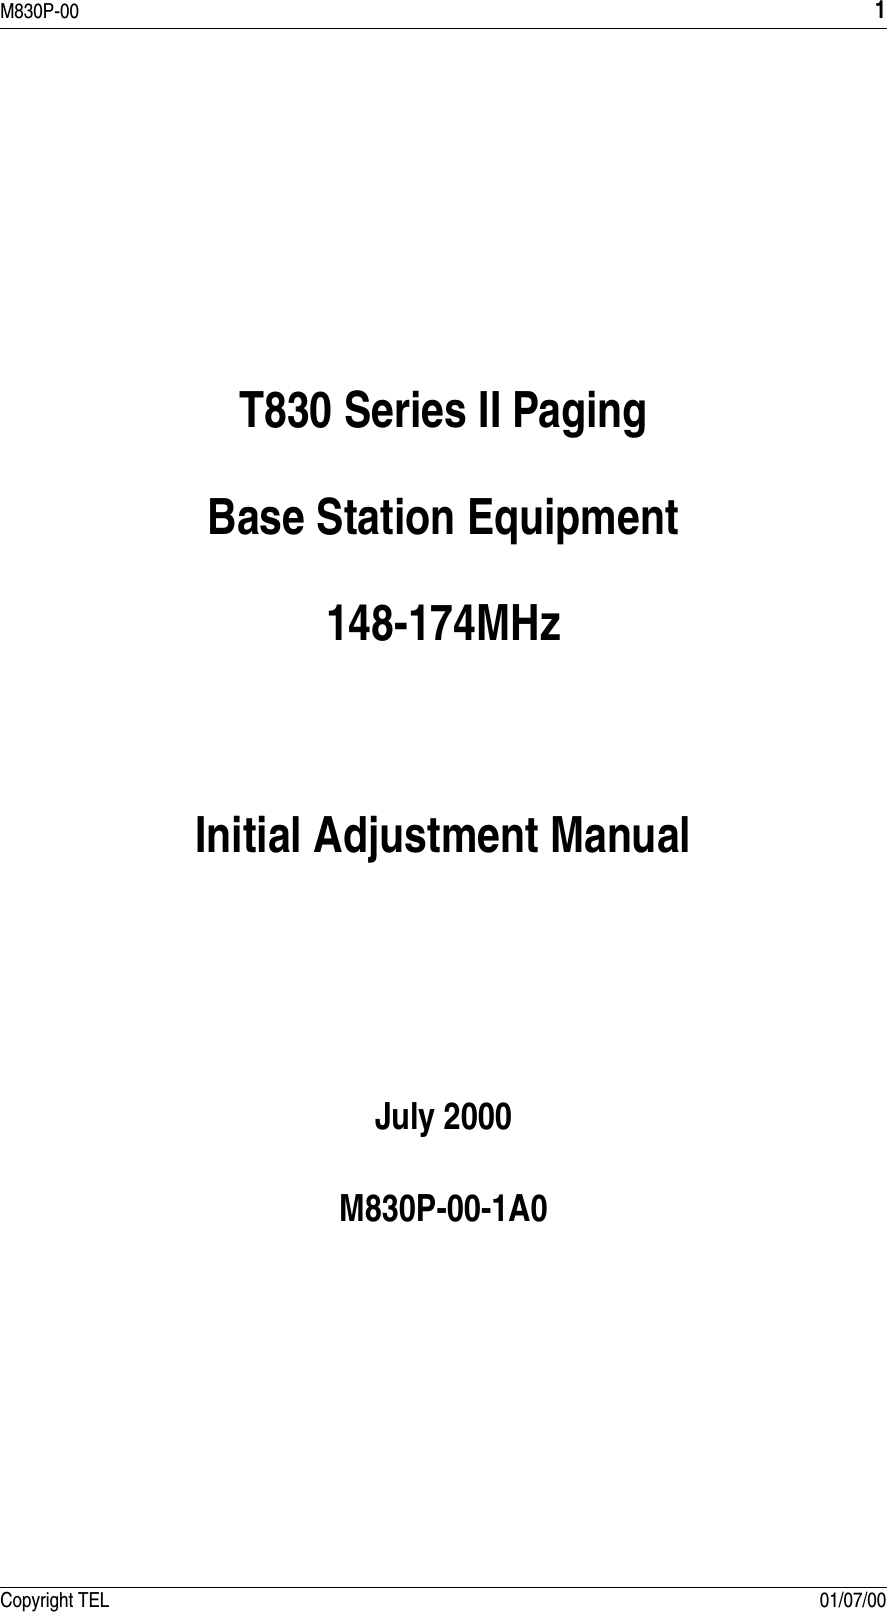 M830P-00 1Copyright TEL 01/07/00T830 Series II PagingBase Station Equipment148-174MHzInitial Adjustment ManualJuly 2000M830P-00-1A0